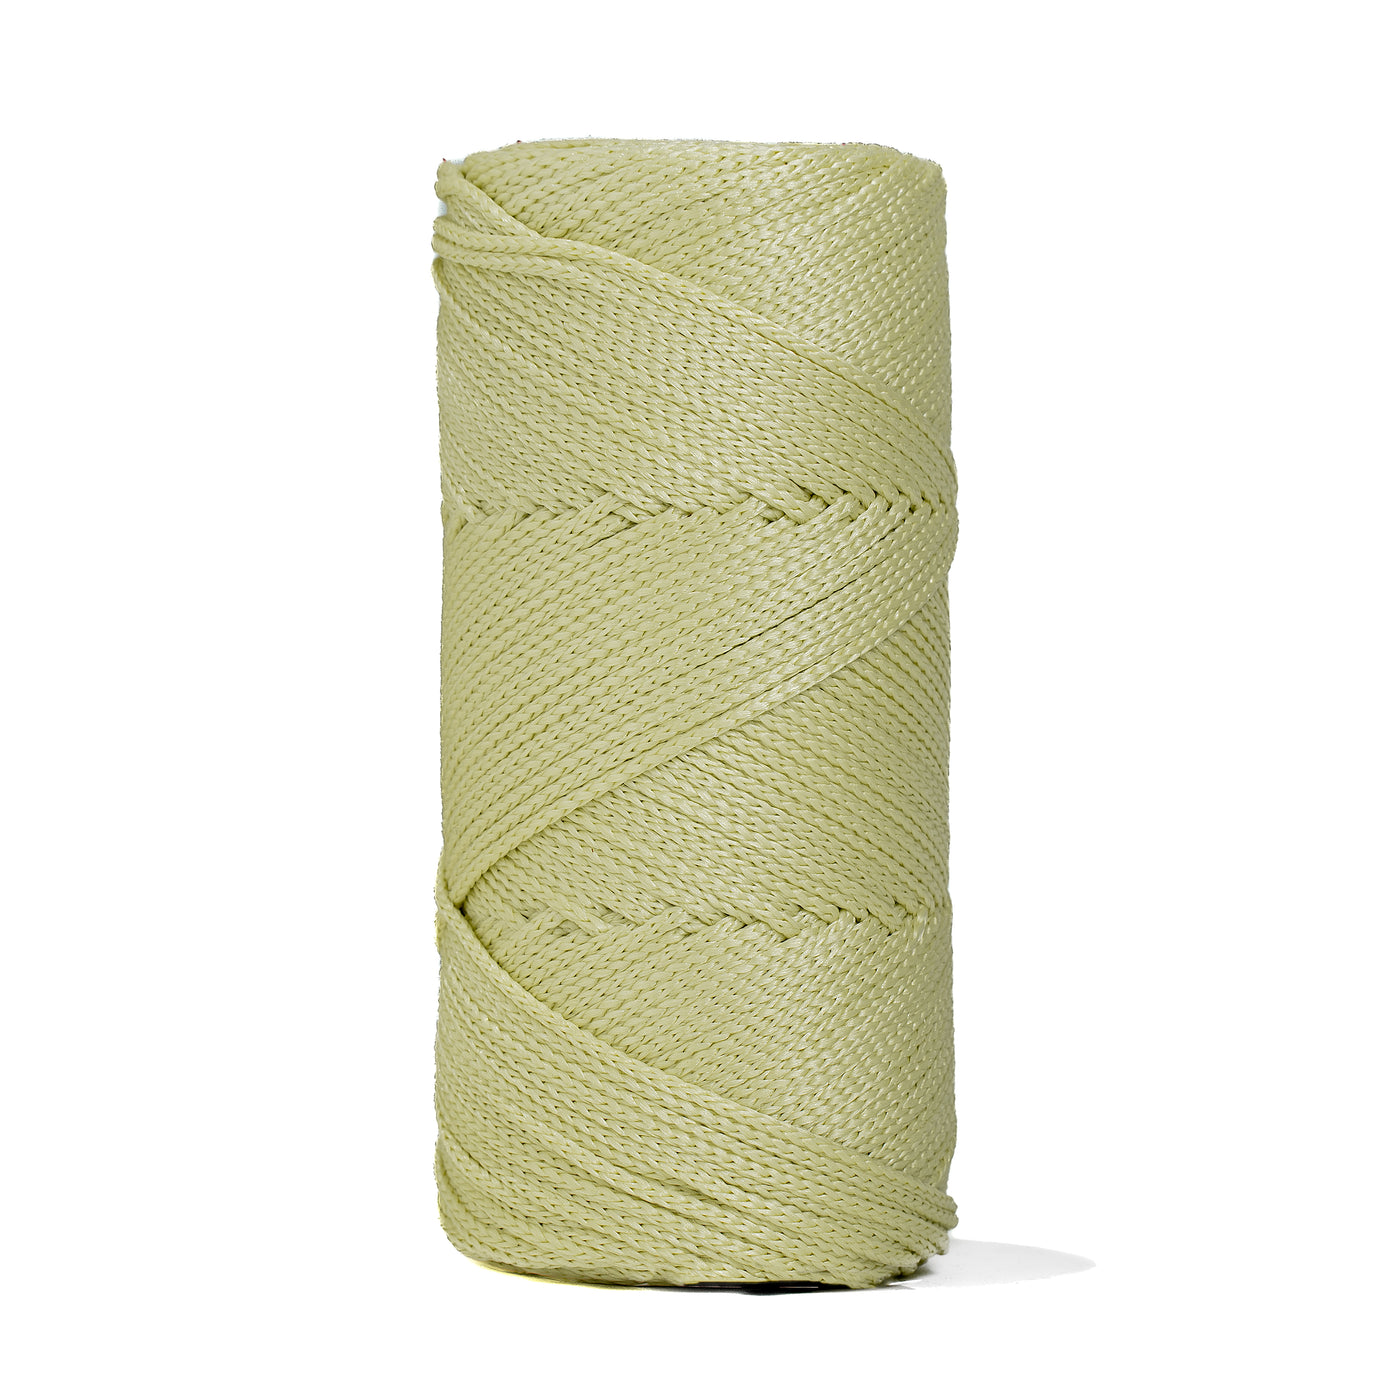 Outdoor 3 mm Macrame Braided Cord – Ice Lemon Color